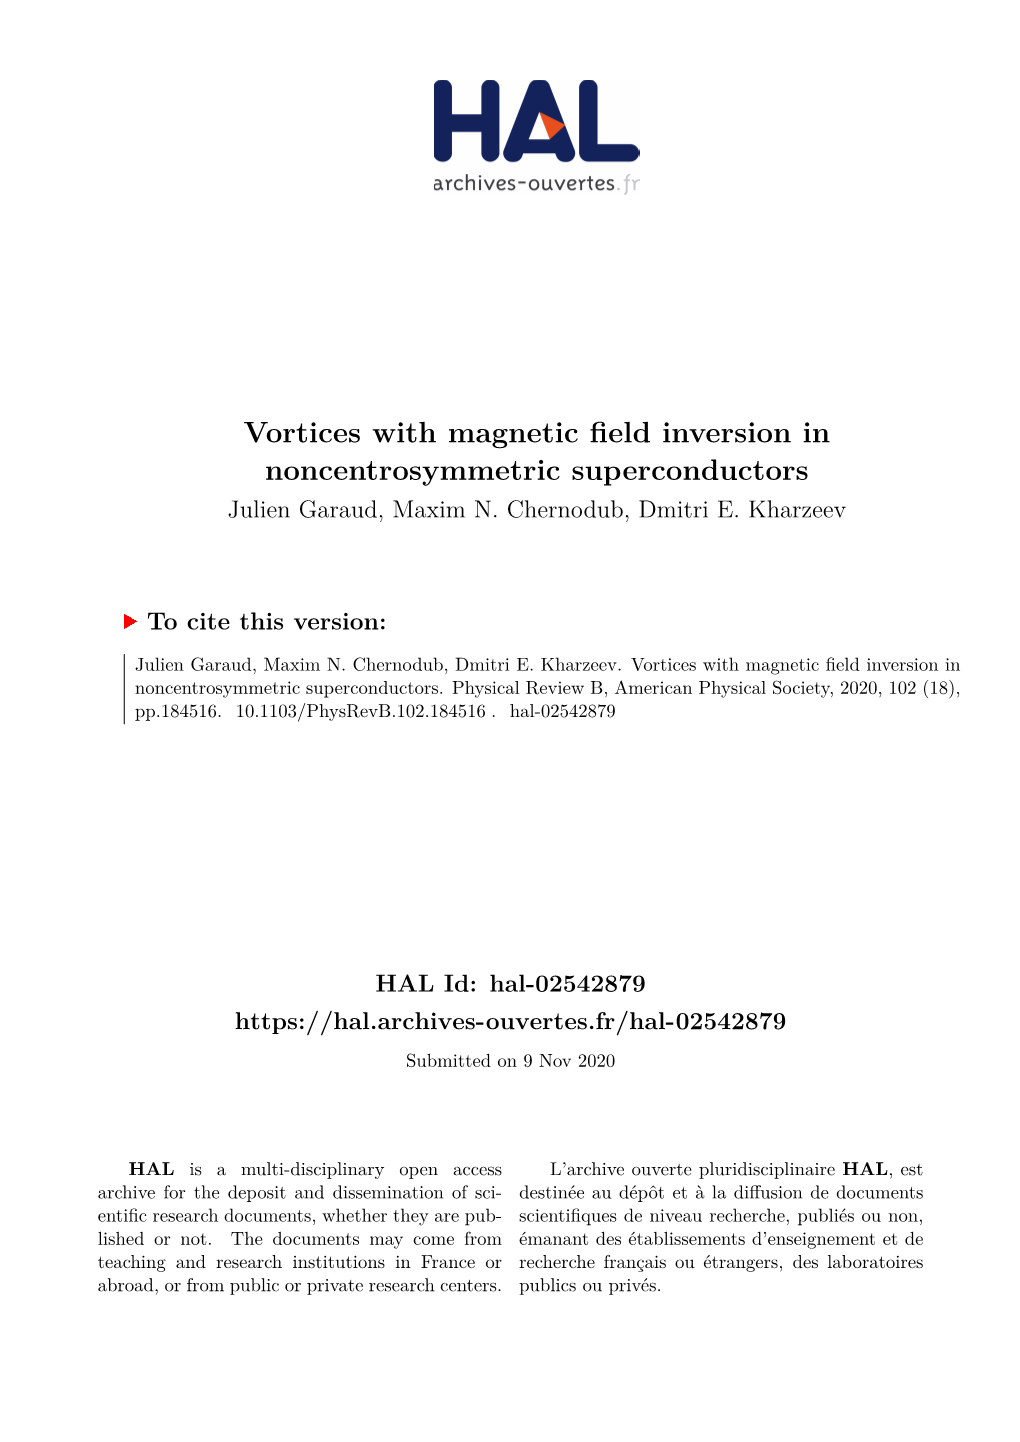 Vortices with Magnetic Field Inversion in Noncentrosymmetric Superconductors Julien Garaud, Maxim N